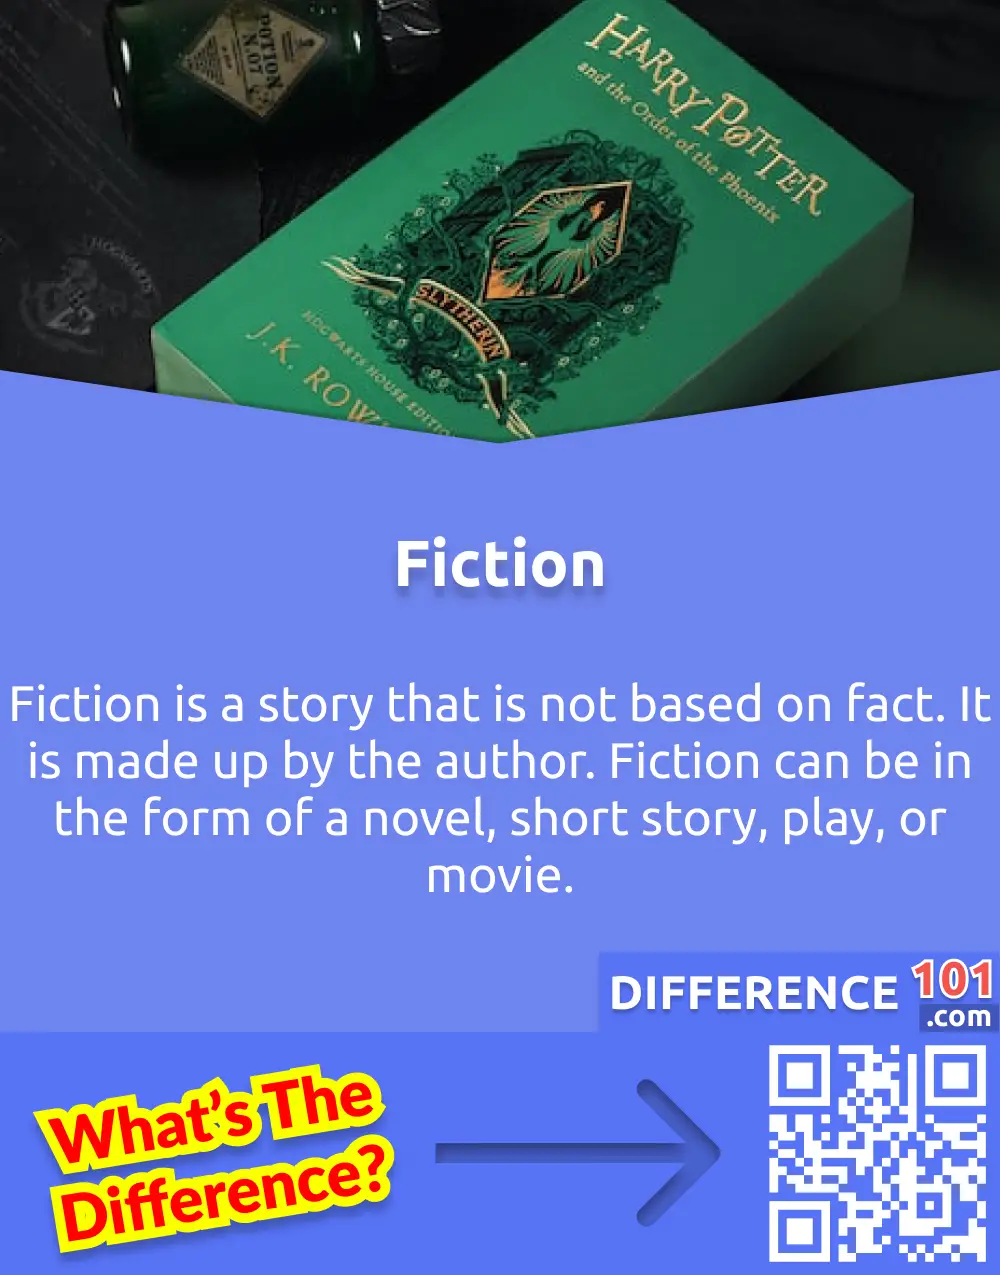 What Is Fiction?
Fiction is a story that is not based on fact. It is made up by the author. Fiction can be in the form of a novel, short story, play, or movie.